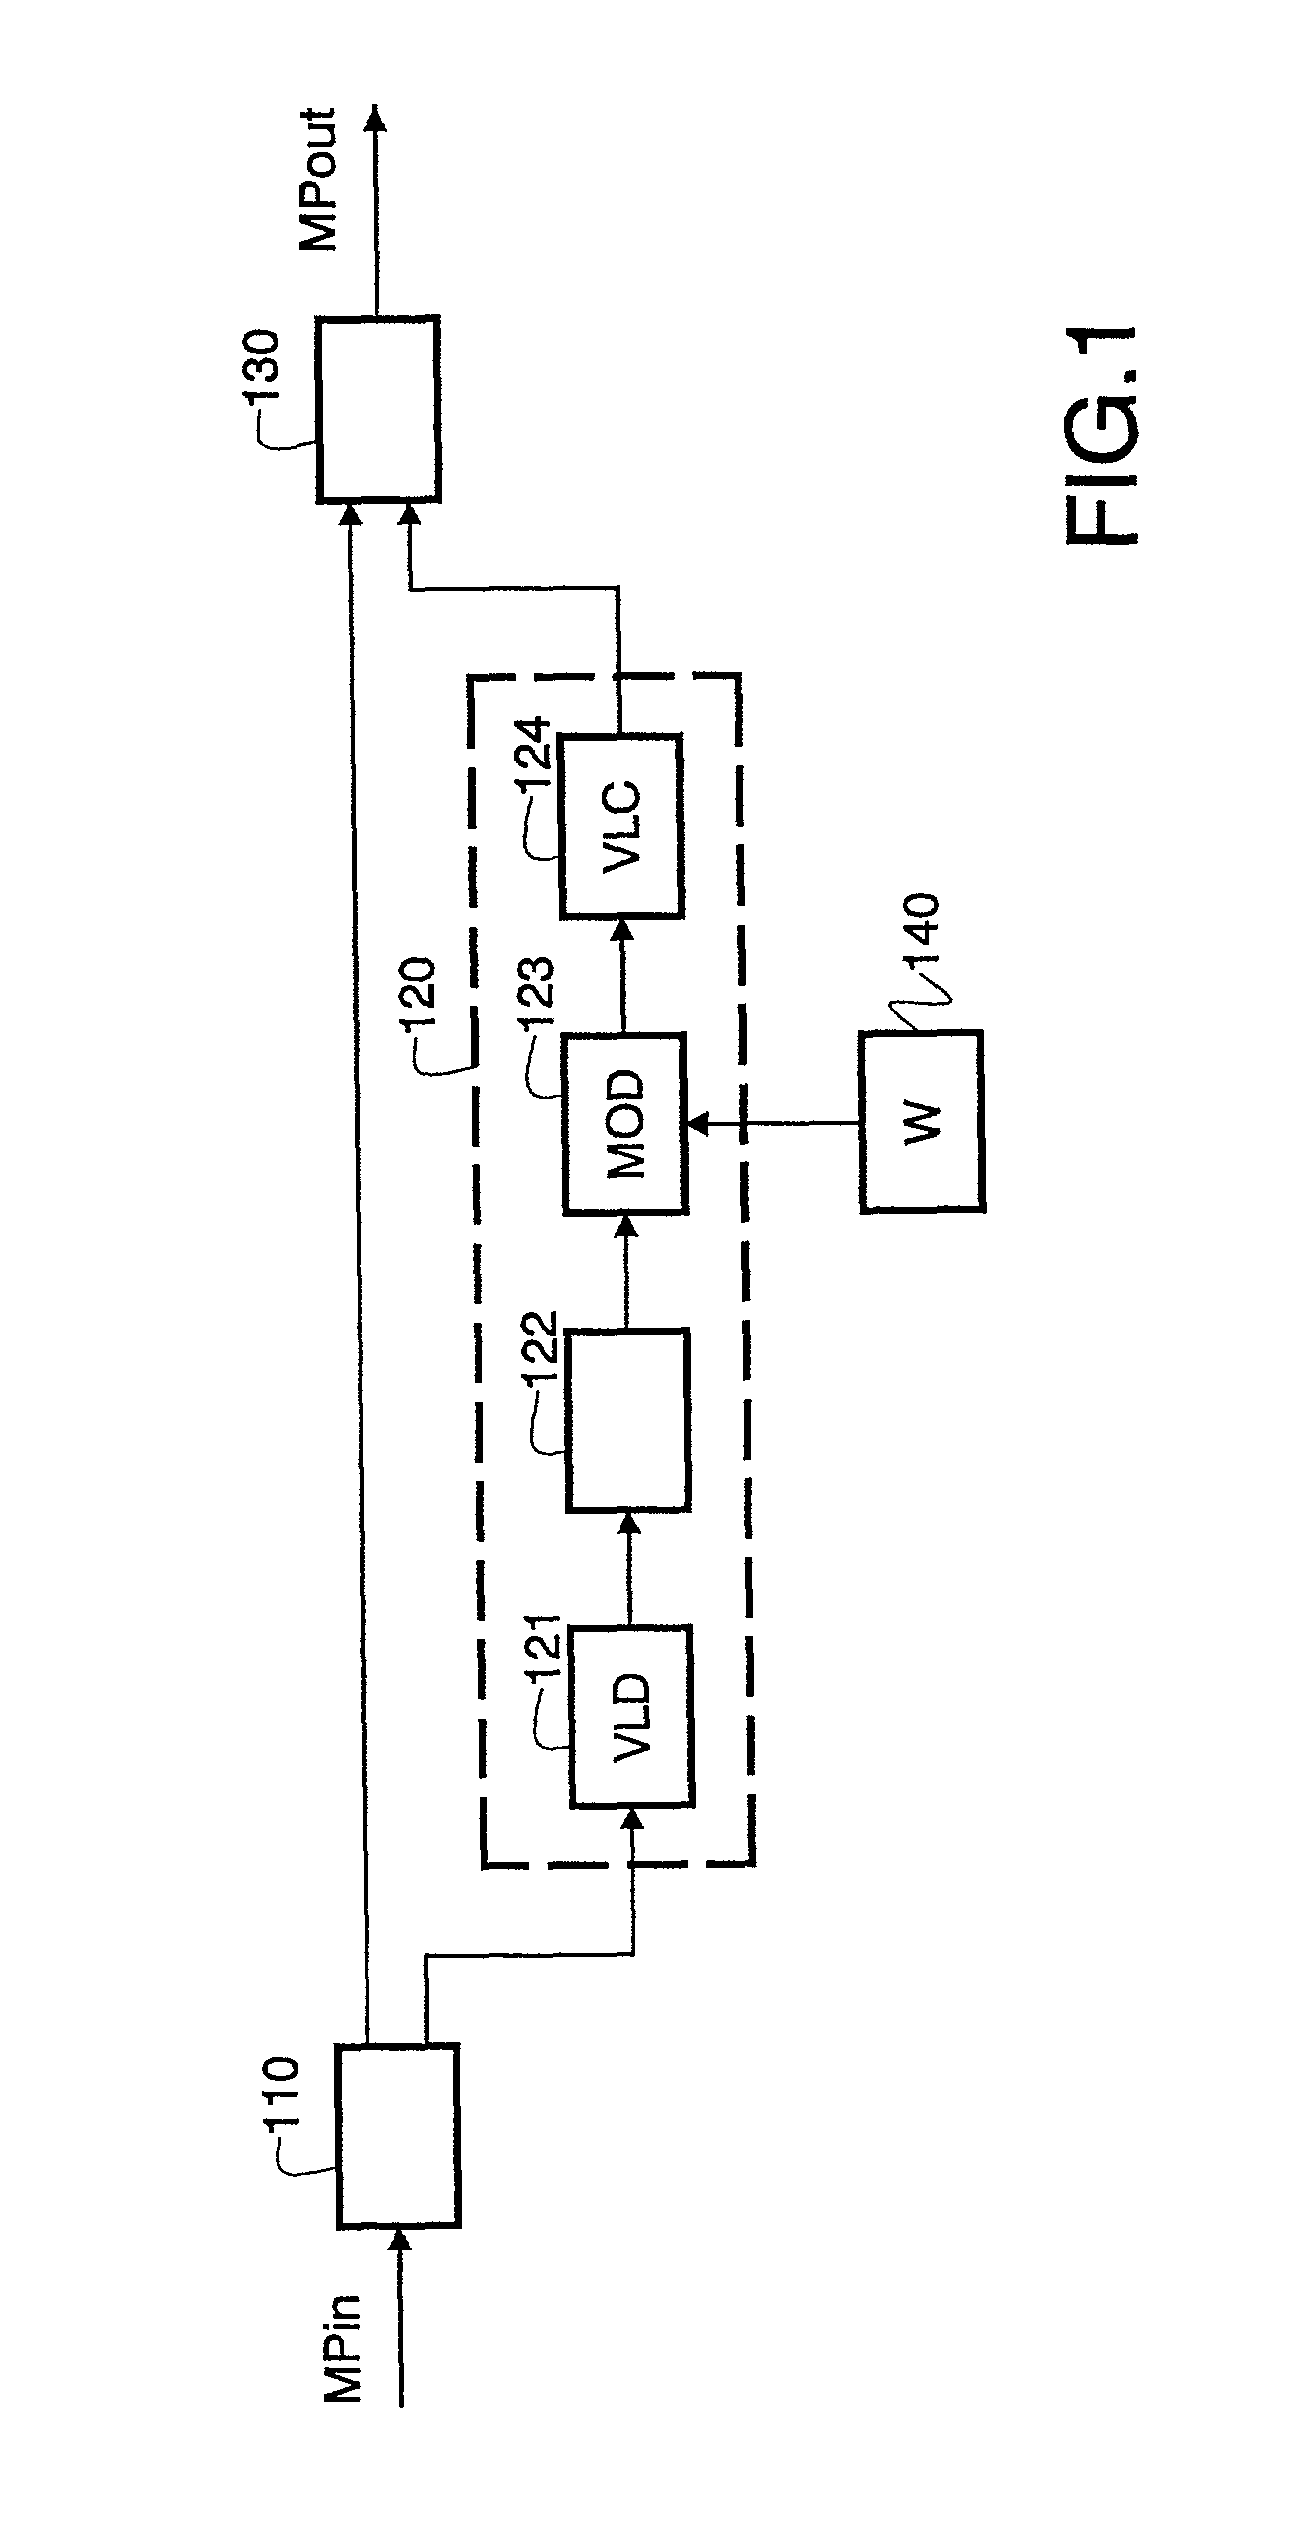 Watermarking a compressed information signal